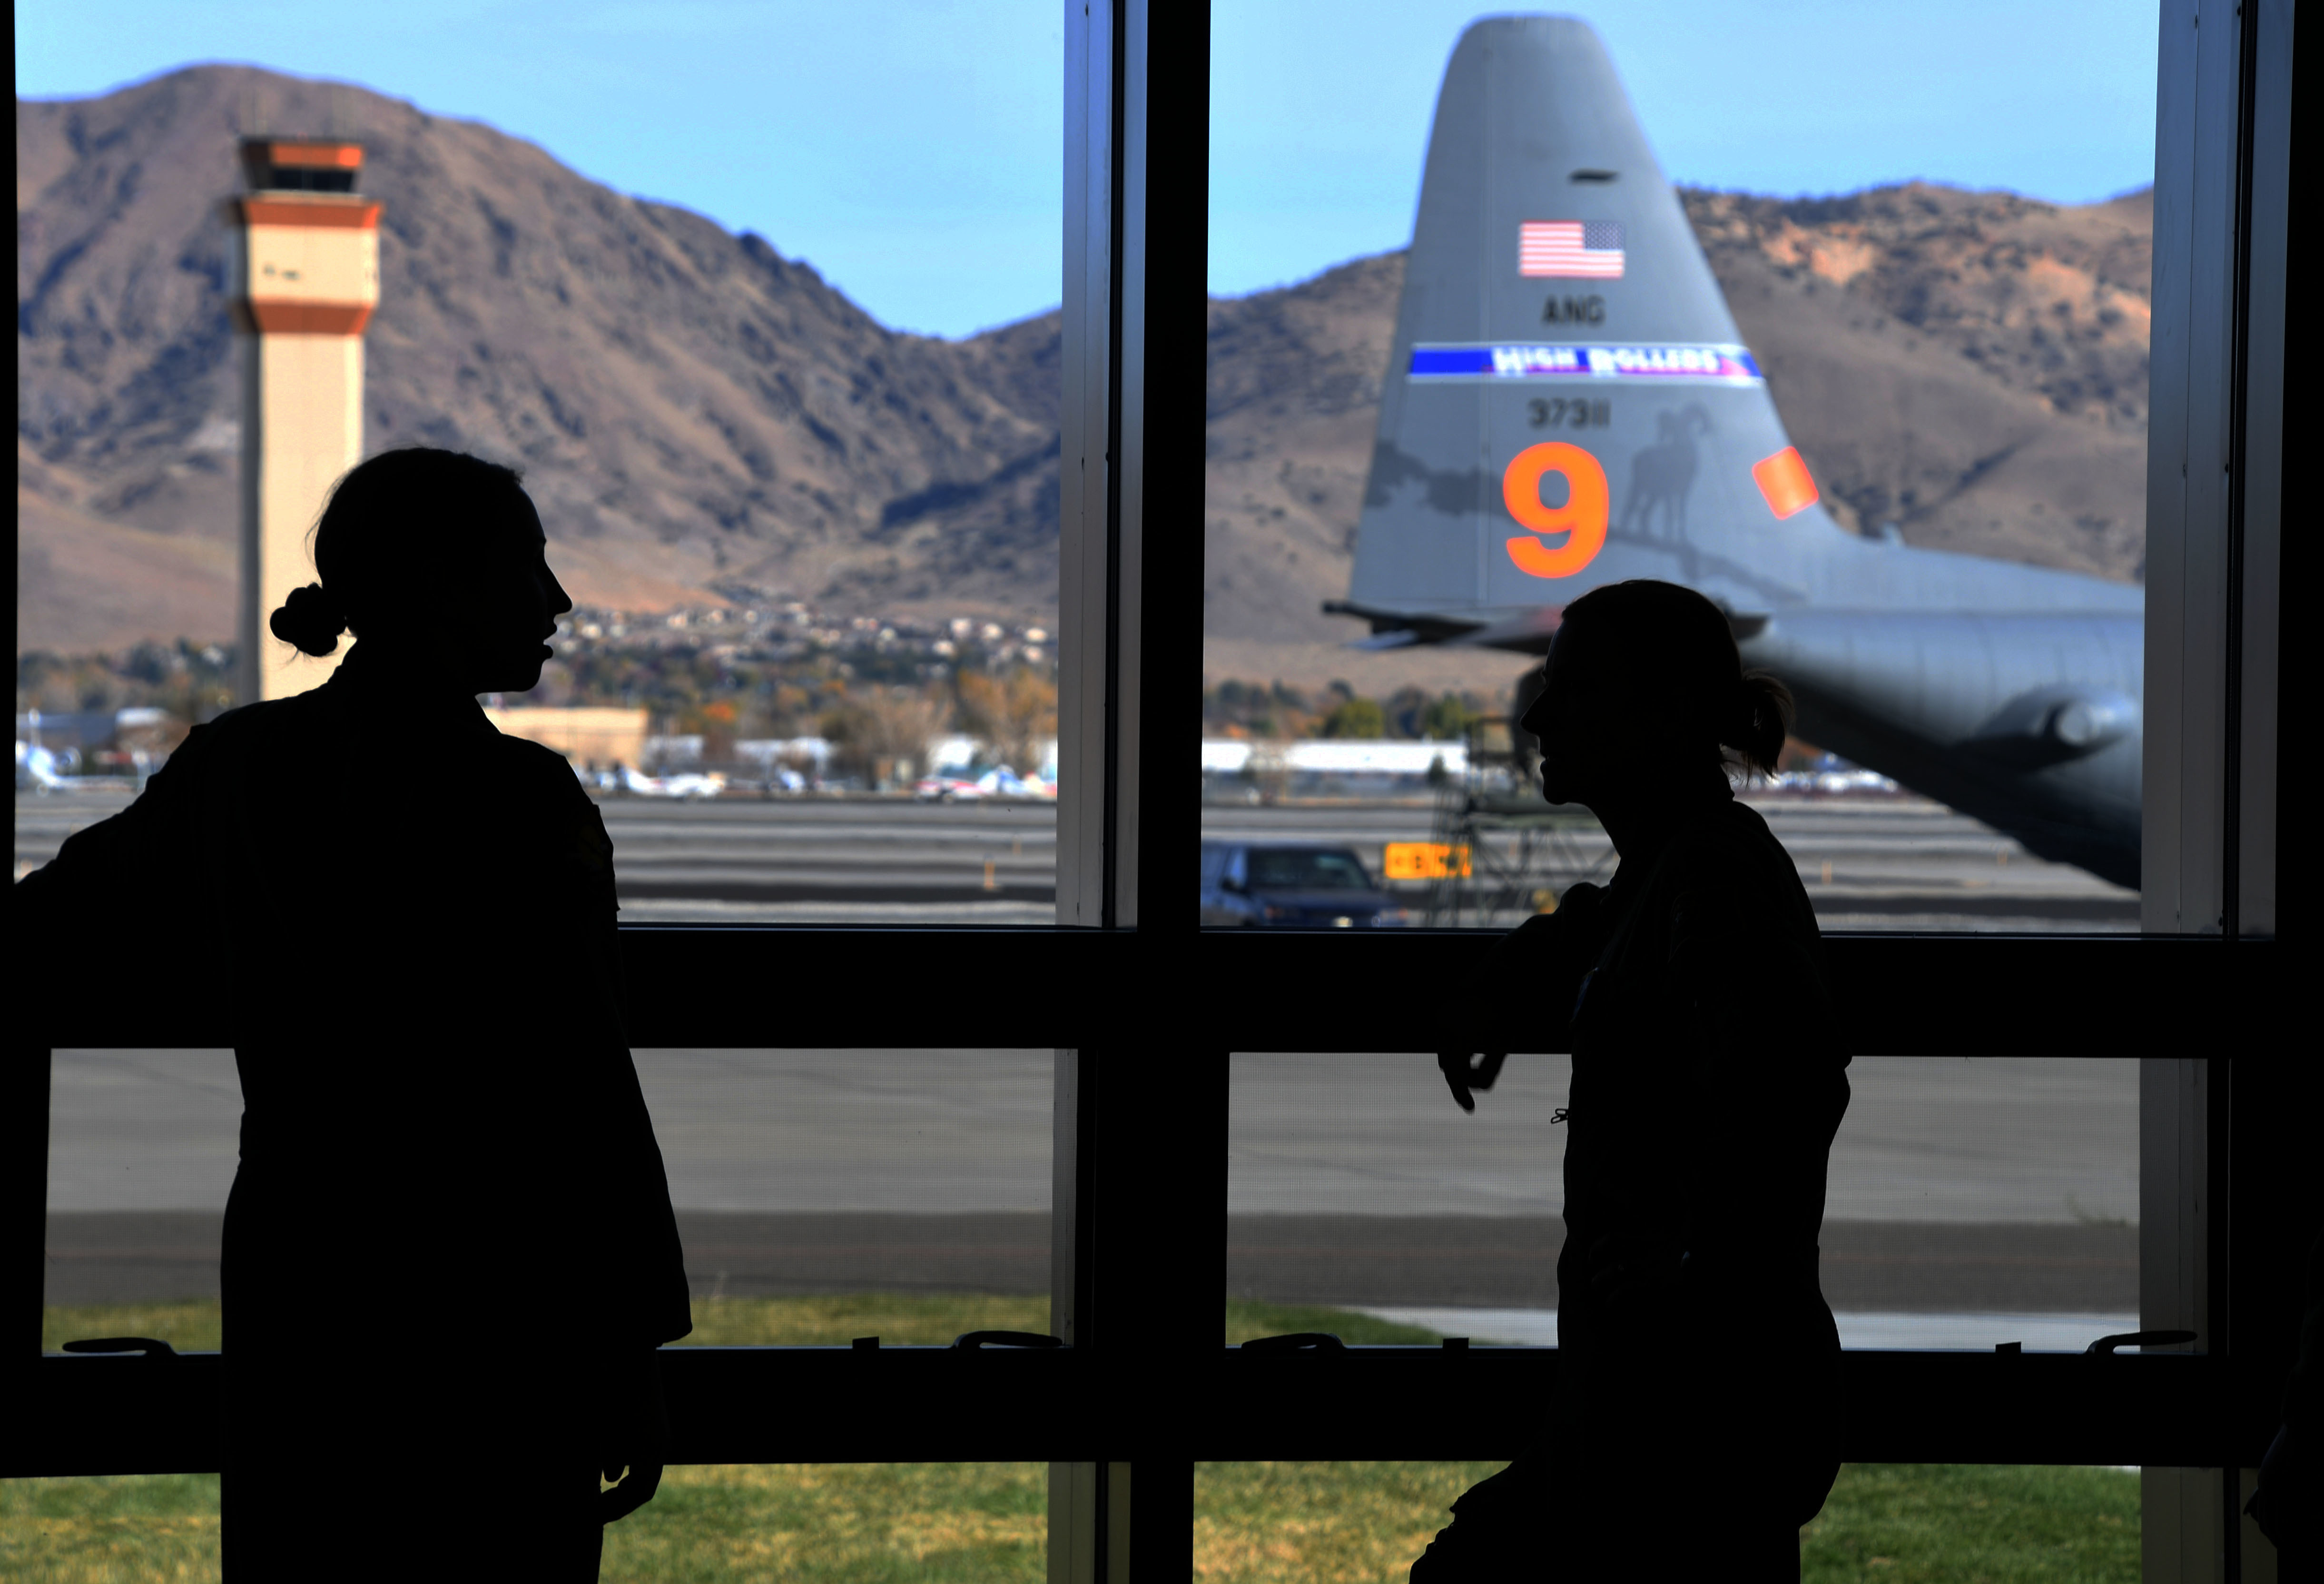 Airmen from the 152nd Airlift Wing in Reno, Nev. tour the newly opened refurbished operations building Nov. 3, 2018 at the Air National Guard base in Reno, Nev. A ribbon cutting ceremony was held to celebrate the completion of an $11 million federally funded modernization of the wing's operations building